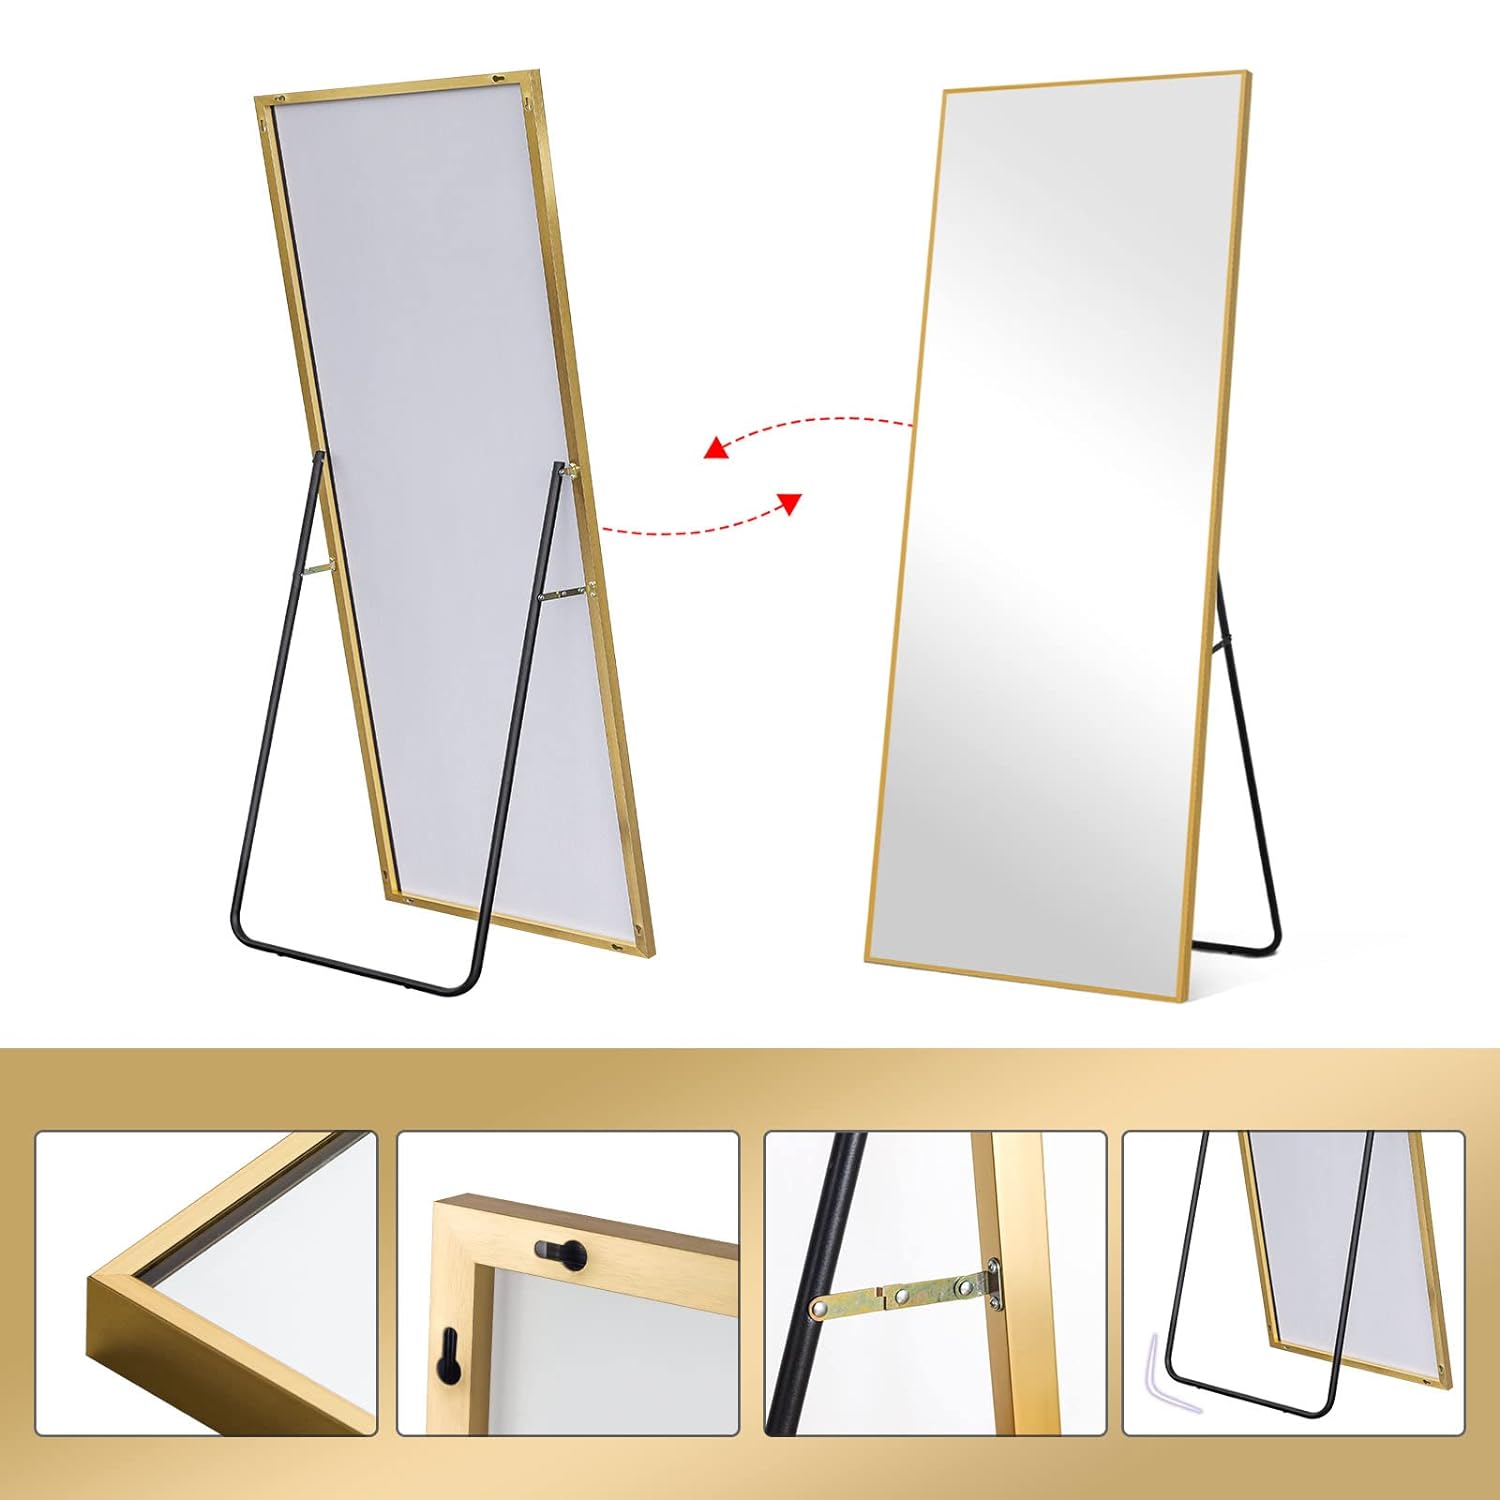 Great Choice Products 63"X20" Mirror Full Length Wall Mirror Floor & Full Length Mirrors For Wall Decor Living Room Wall-Mounted Mirrors Body Mirro…